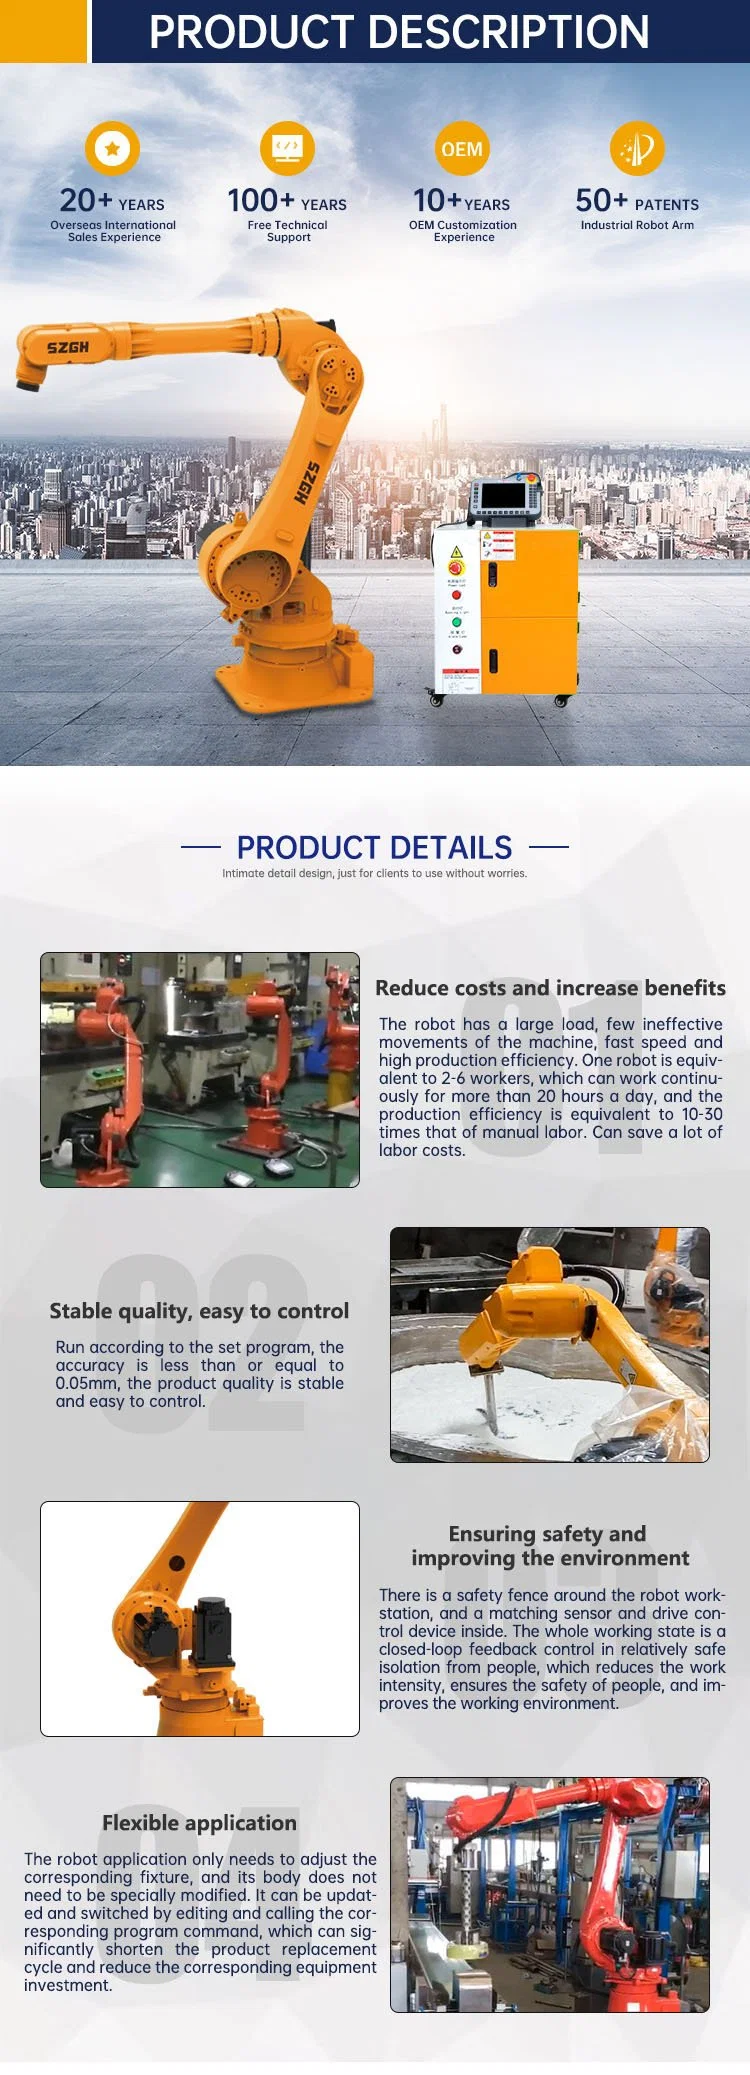 Low Price TIG Arc MIG Welding, Loading and Unloading, Pick and Place, Painting, Handling Industrial Automatic 6 Axis Robot